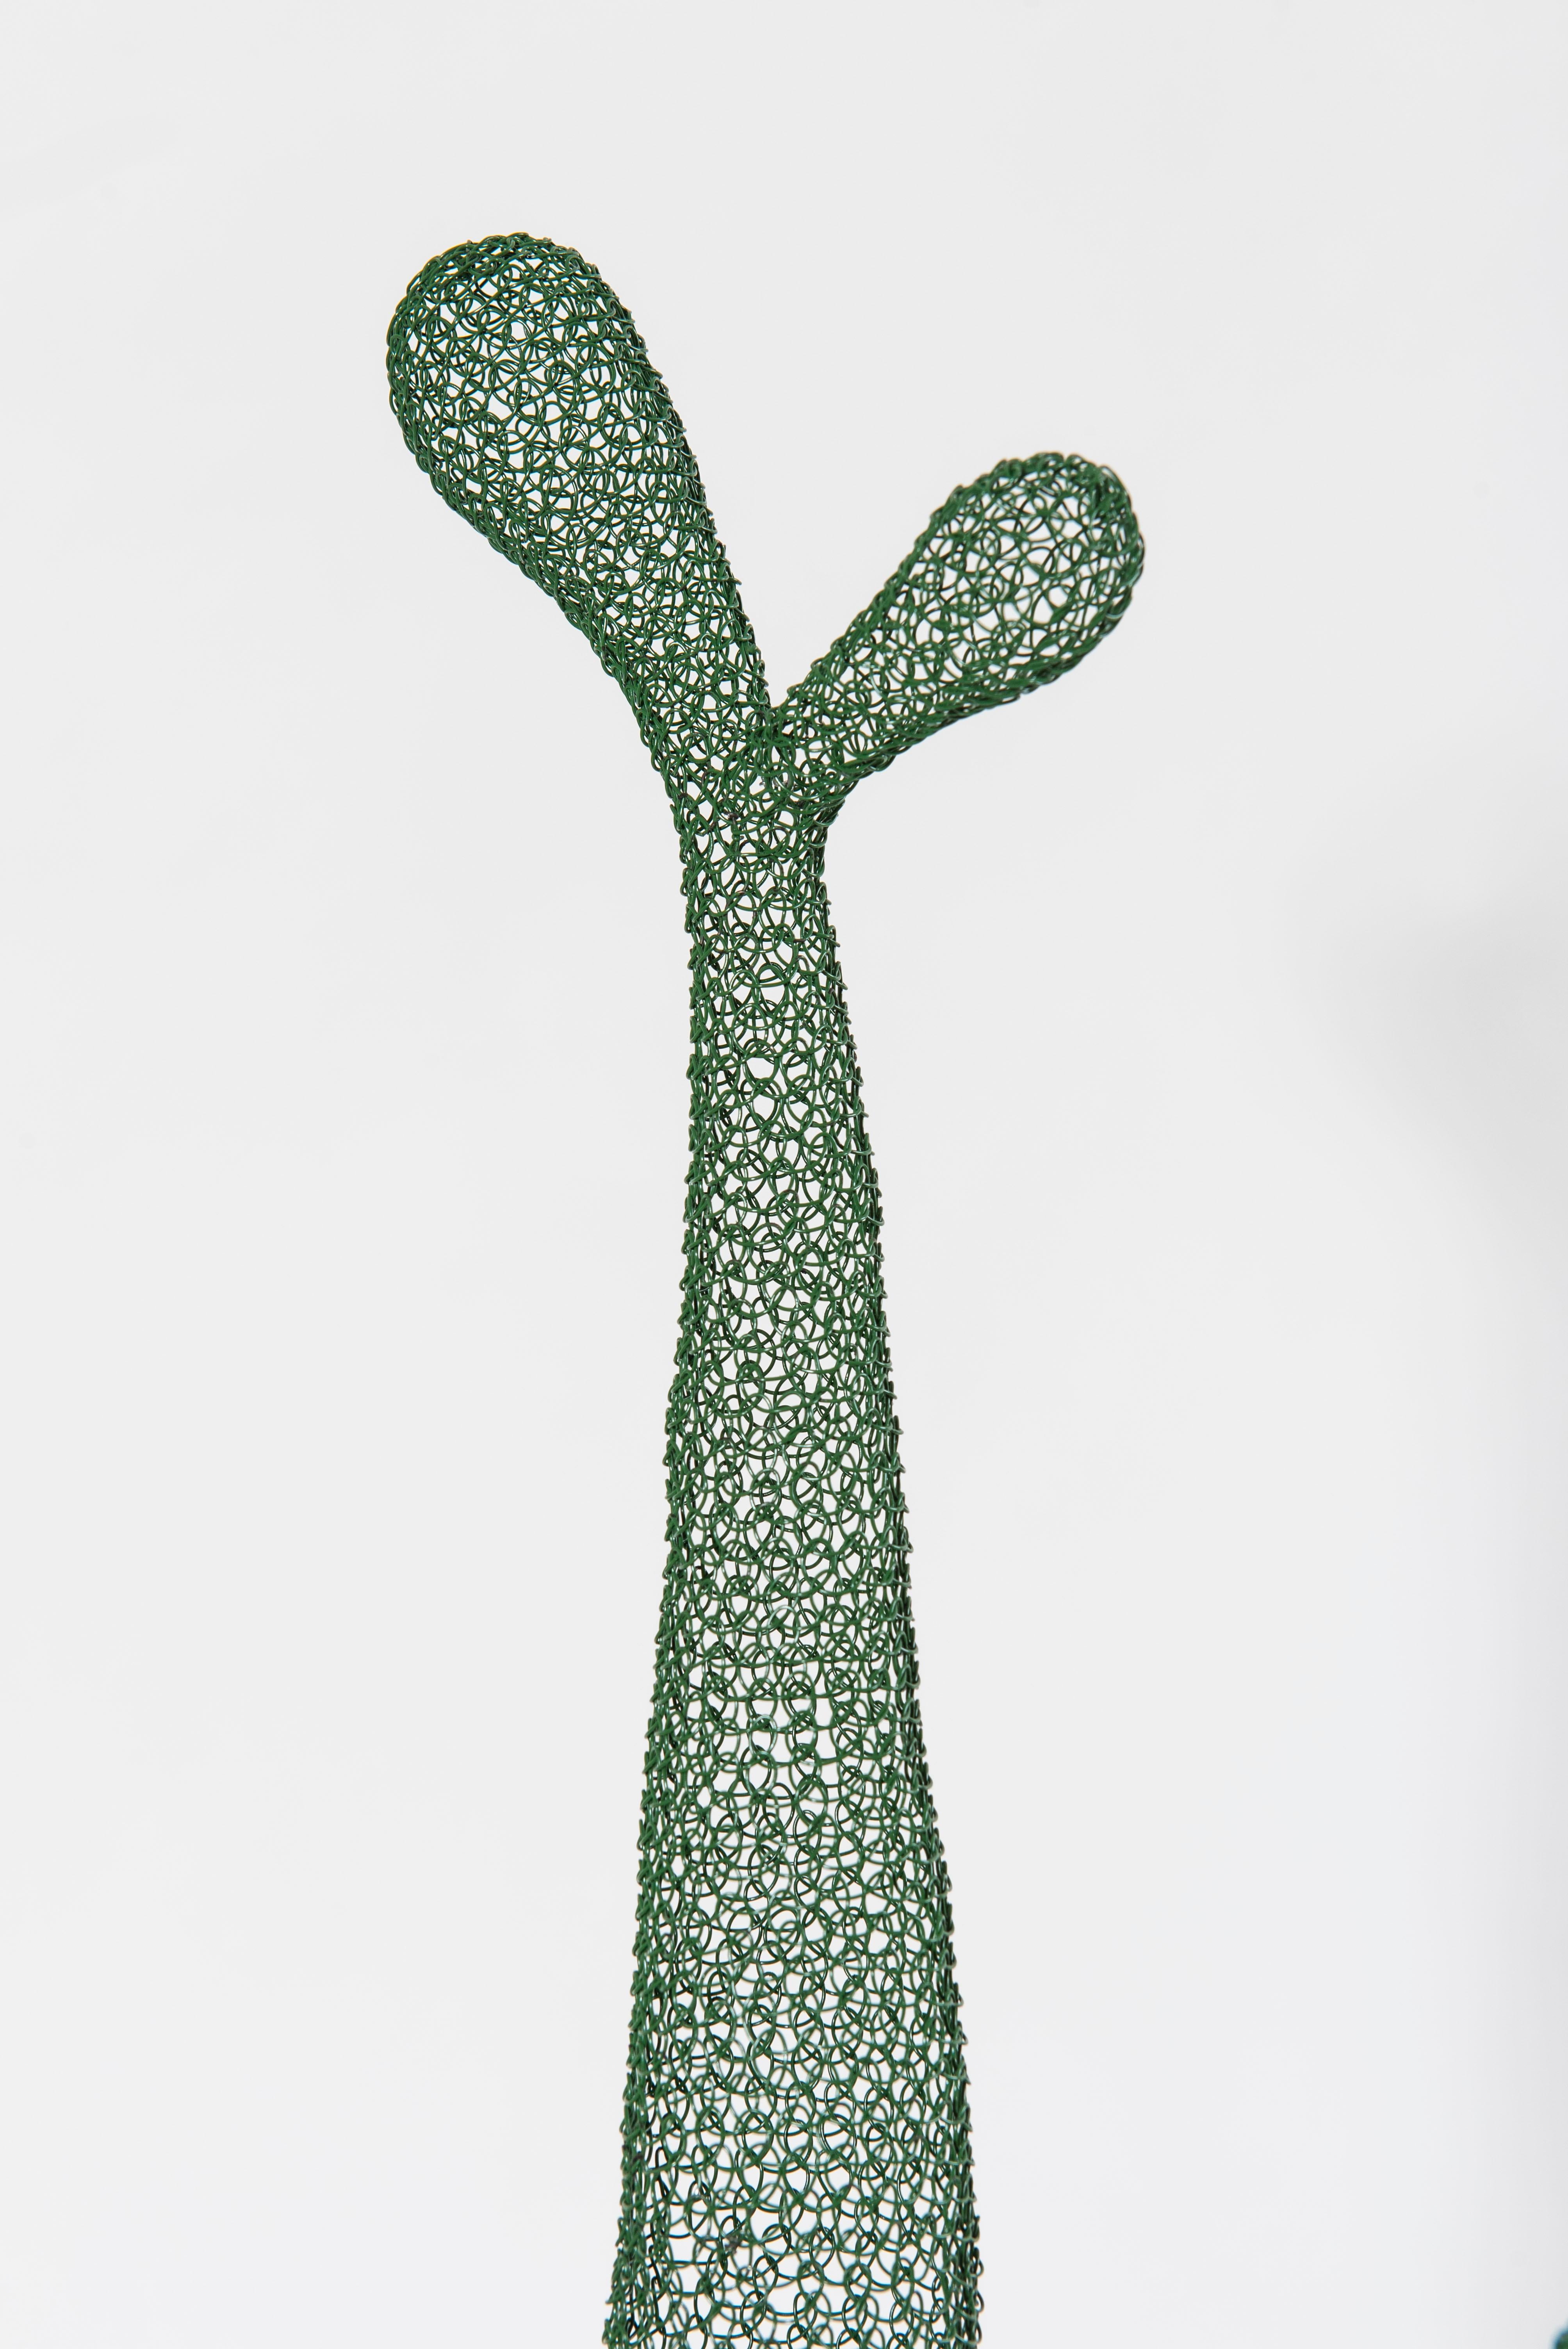 This mesh-work sculpture named «3 Cactus » is entirely hand-knitted from a single metal wire plasticized in green. It was created and made by artist Delphine Grandvaux. This work consists of three similar and independent parts, each of which